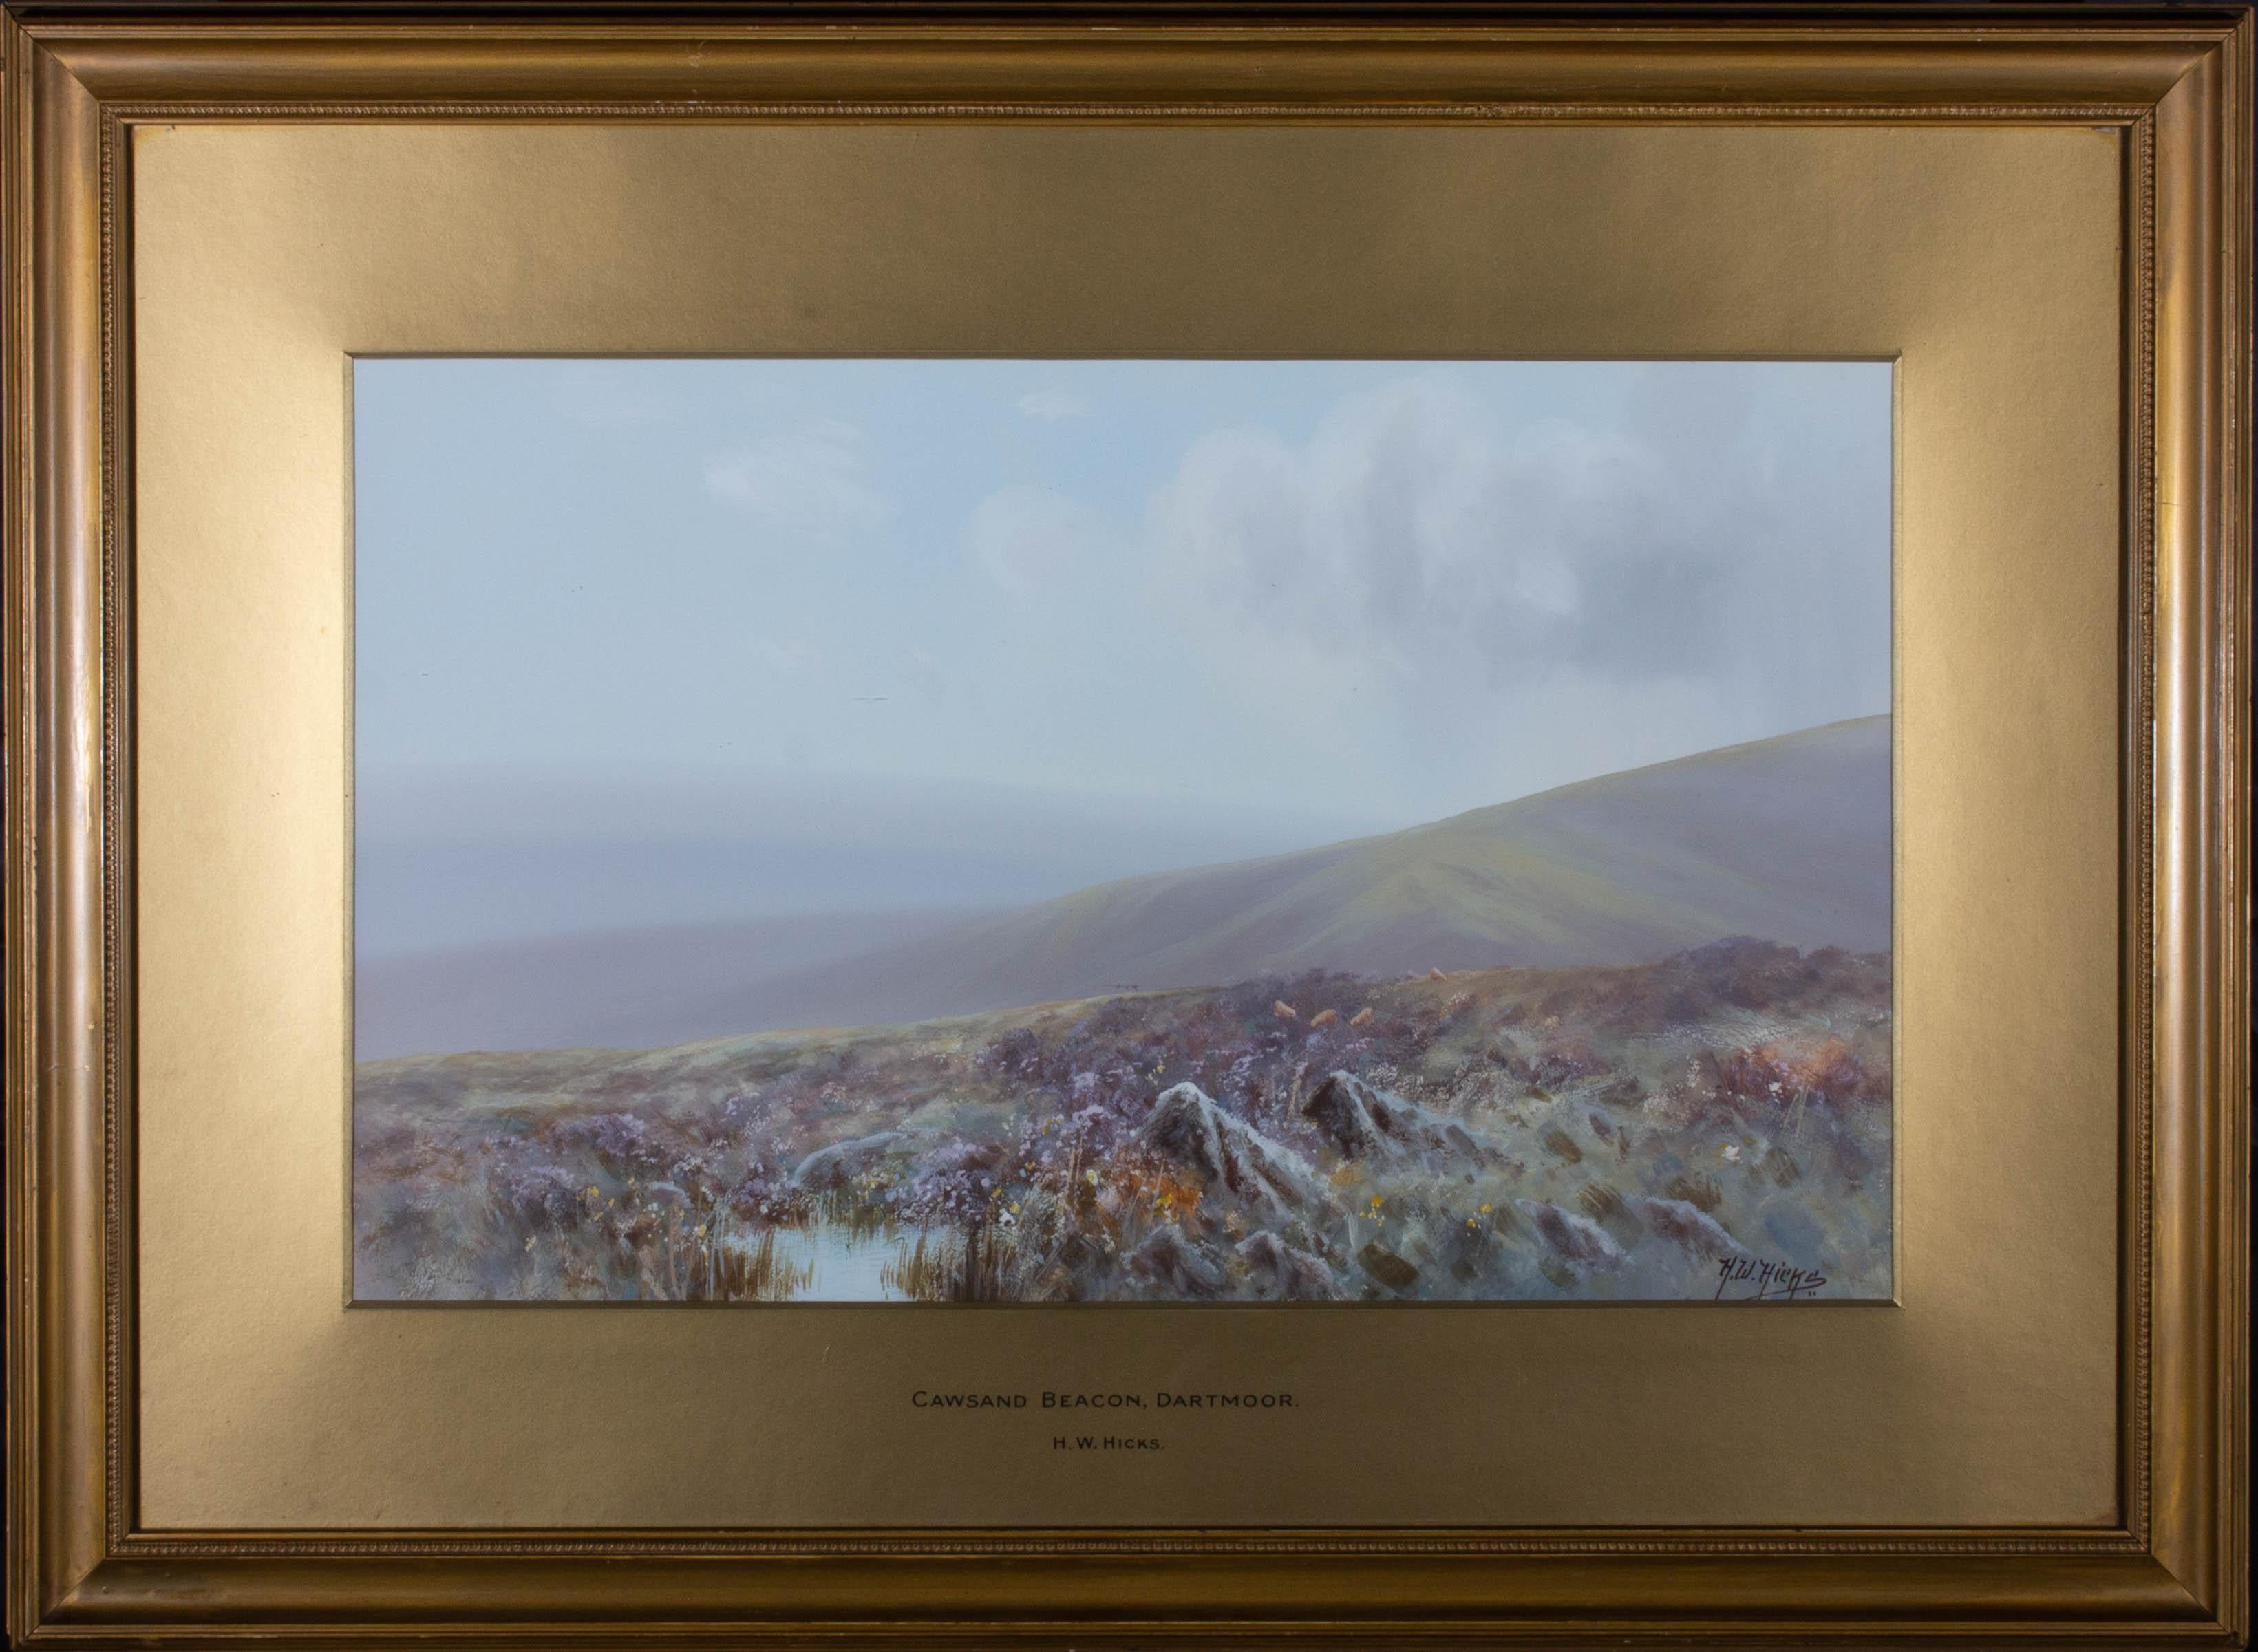 An atmospheric landscape at Cawsand Beacon in Dartmoor. Presented glazed in a gold card mount and a distressed gilt-effect wooden frame. Signed to the lower-right edge. The title and name of the artist are also inscribed at the lower edge of the